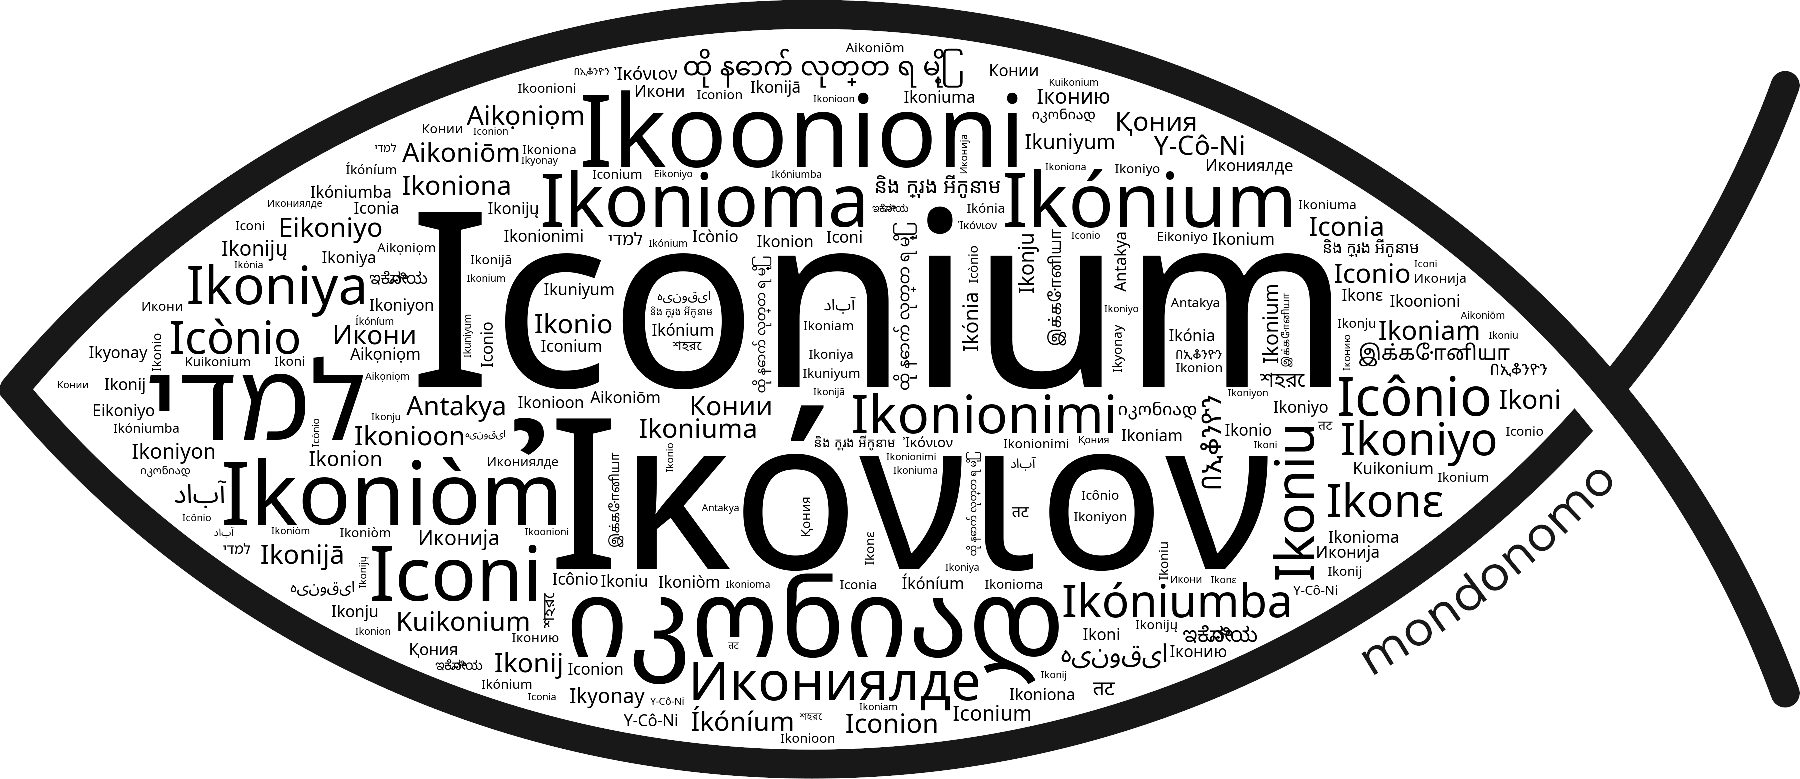 Name Iconium in the world's Bibles